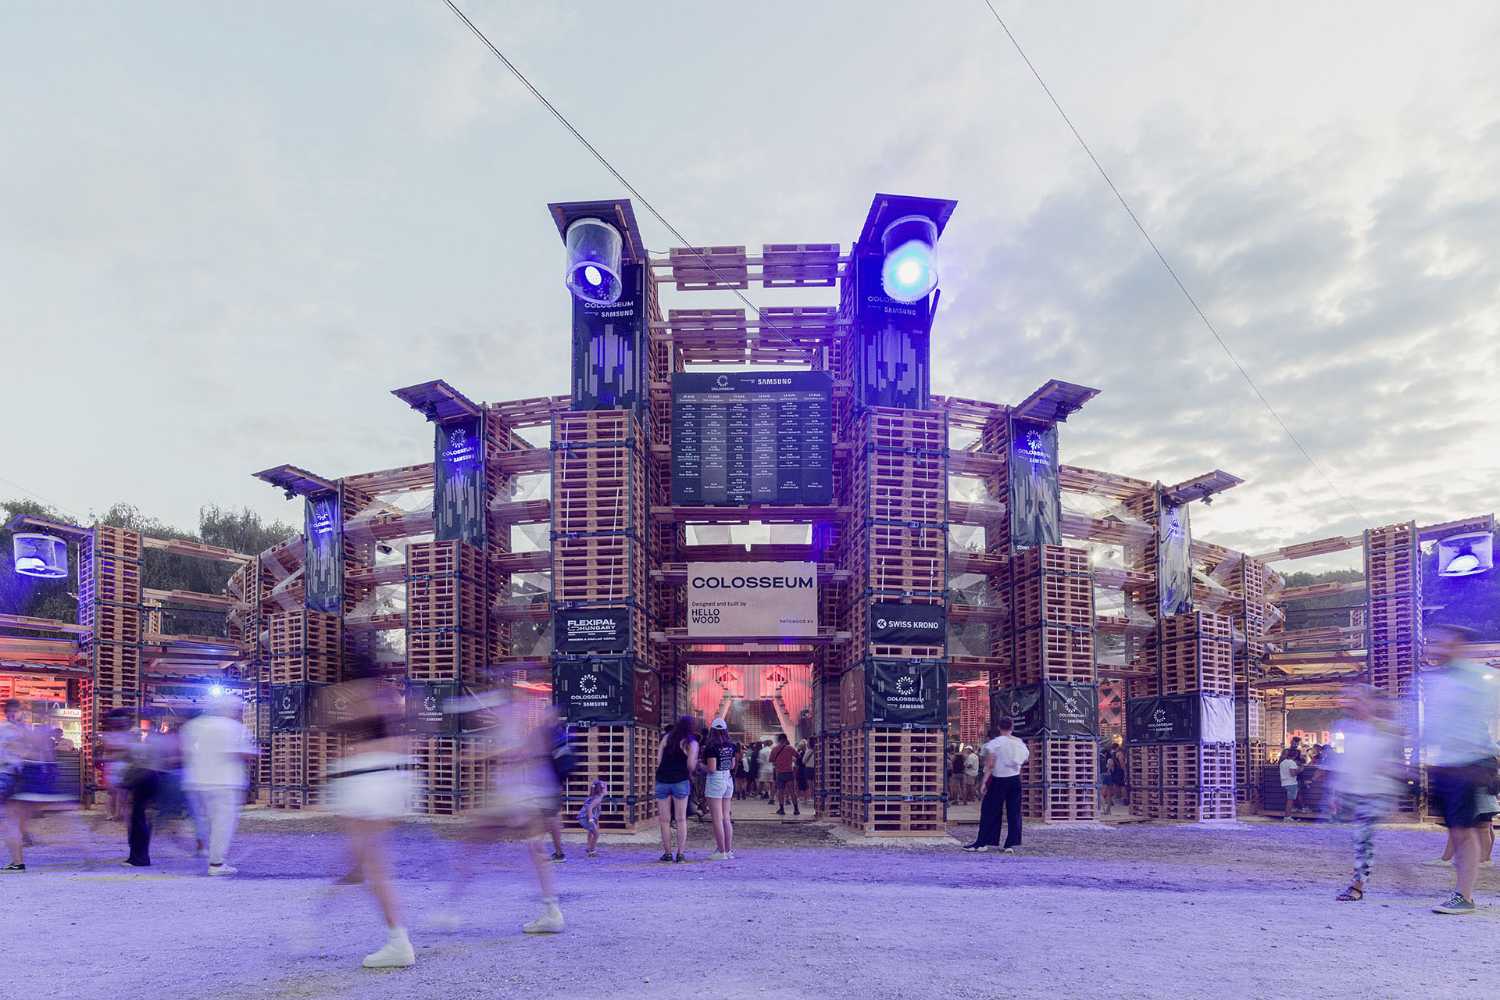 A new edition of the Colosseum at the Sziget Festival. An amphitheater built out of re-usable pallets